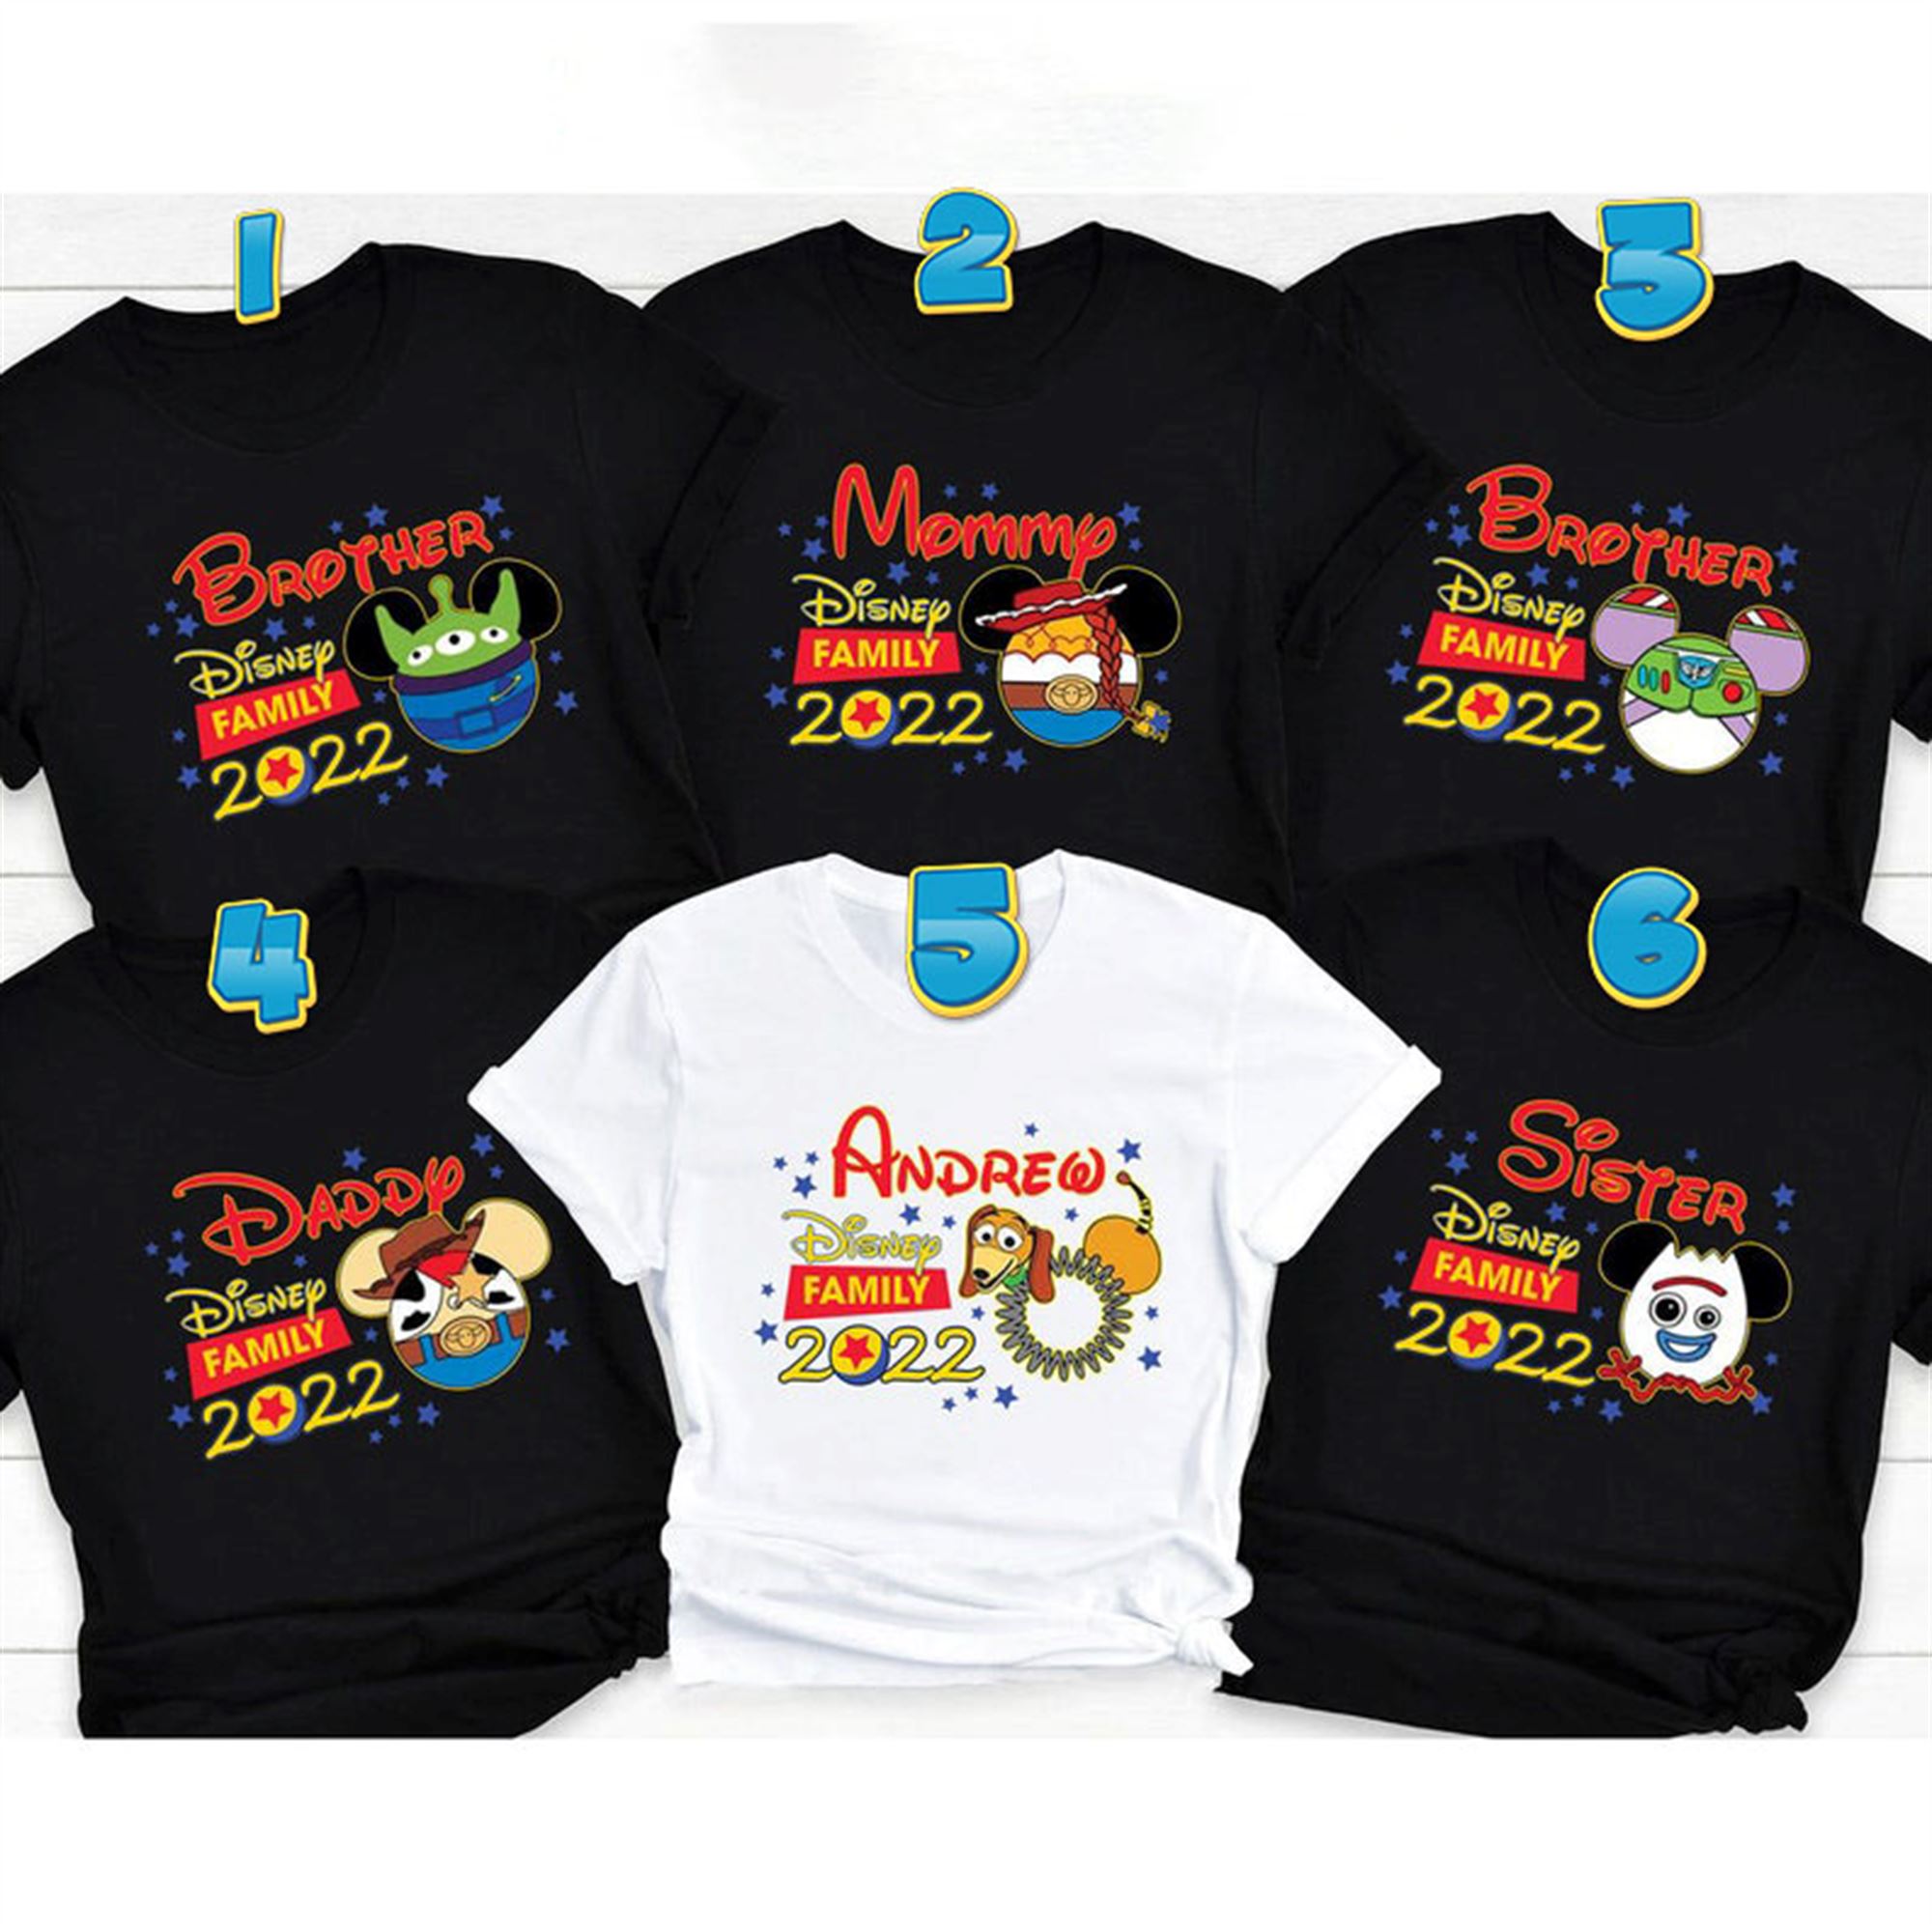 Customized Toy Tale Film Personality T Shirt With Mickey Ears For Disney Family 